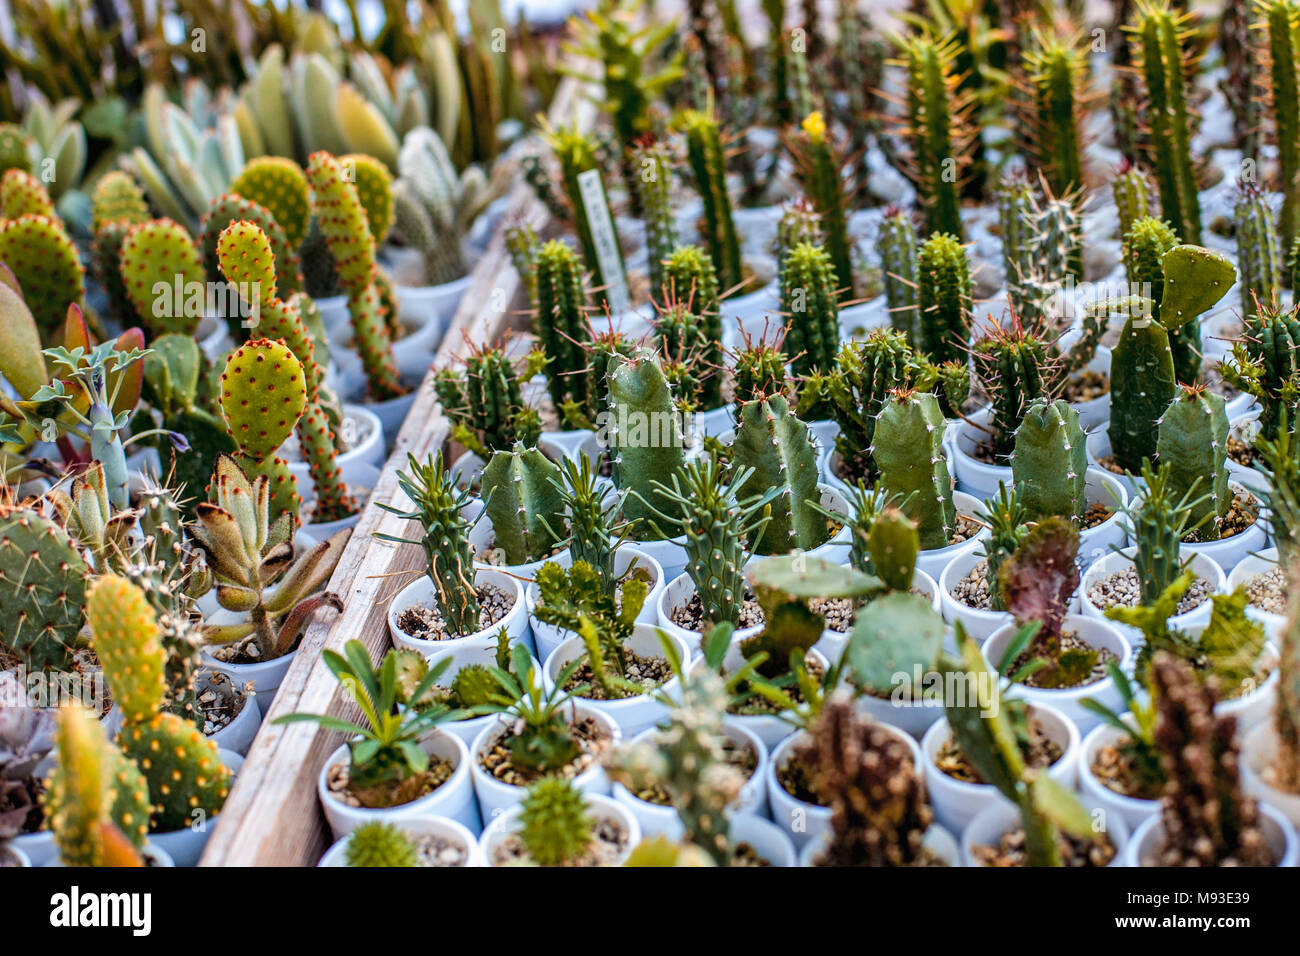 Selection of interesting shapes of numerous potted cactus plant species displayed in Budapest Zoo and Botanical Garden for visiting tourists to see Stock Photo